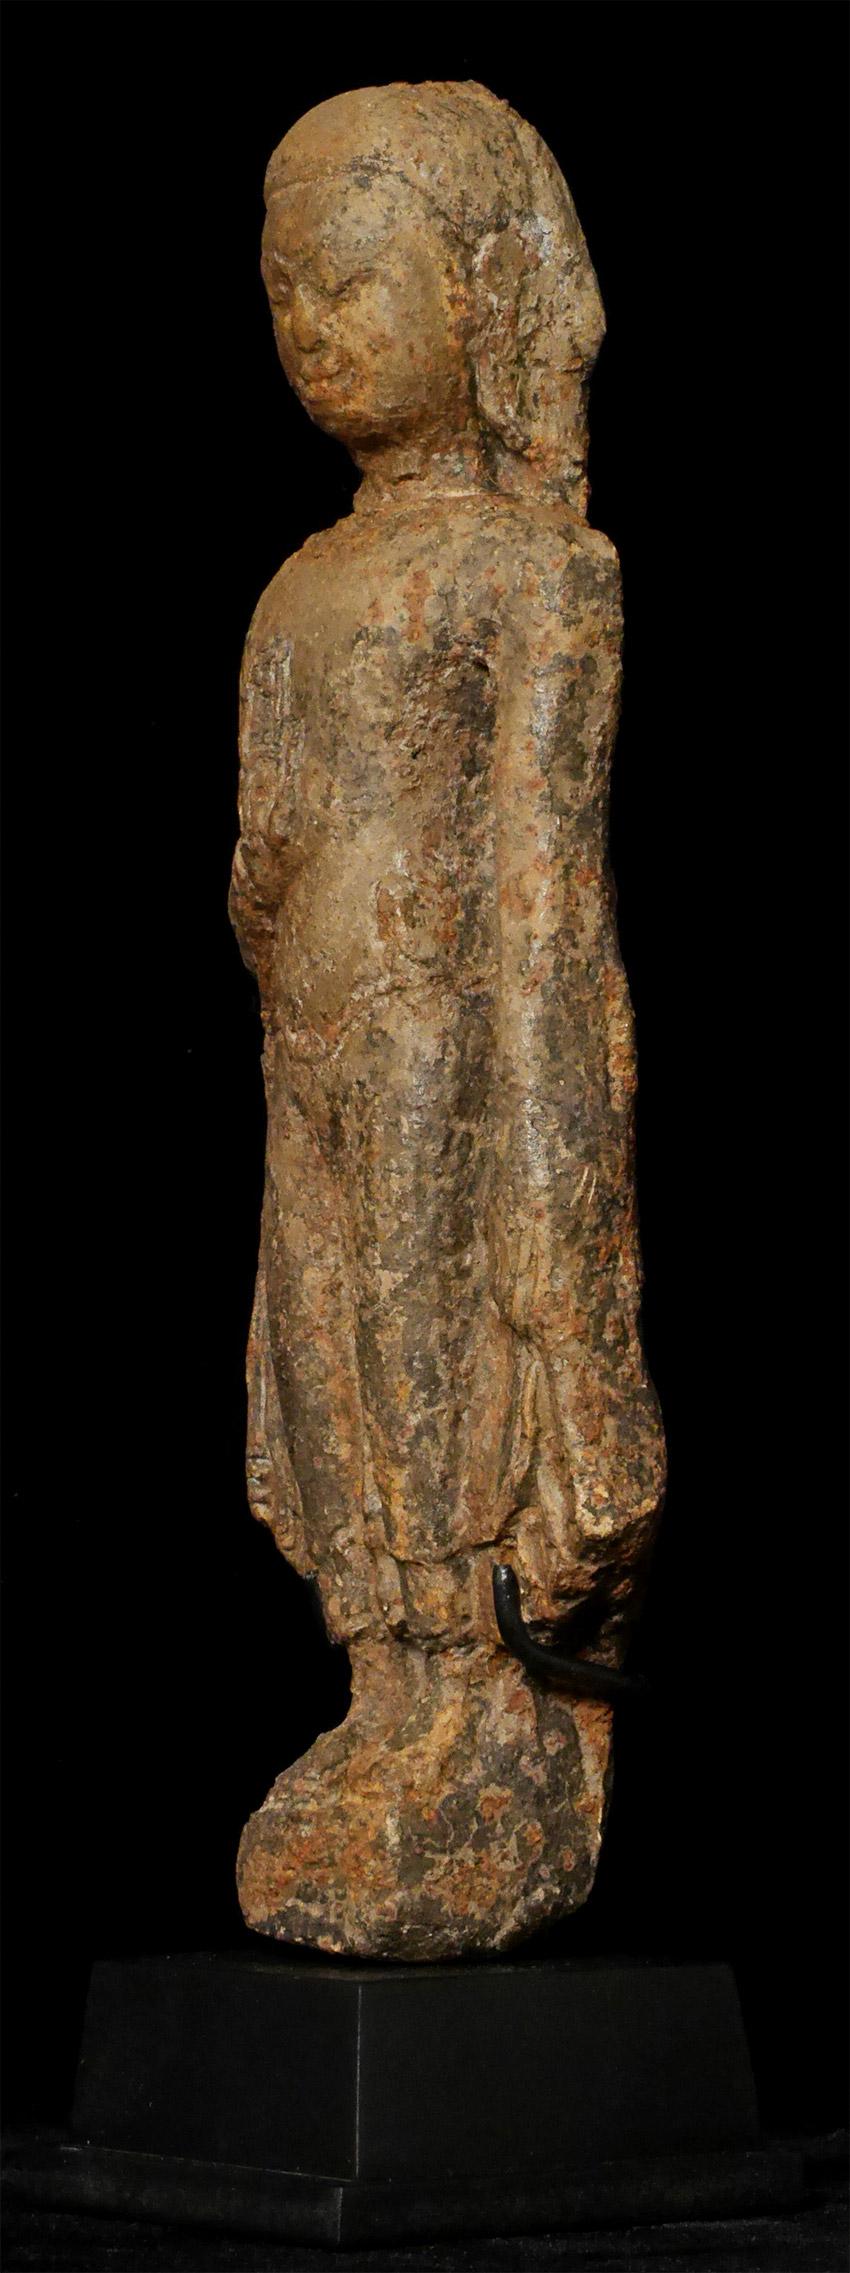 Rare 13thC Northern Thai Haripunchai terracotta standing Buddha. Extremely hard to find in complete condition. Significant wear, though the expressive face shines brightly and clearly. Very good size at 8.25